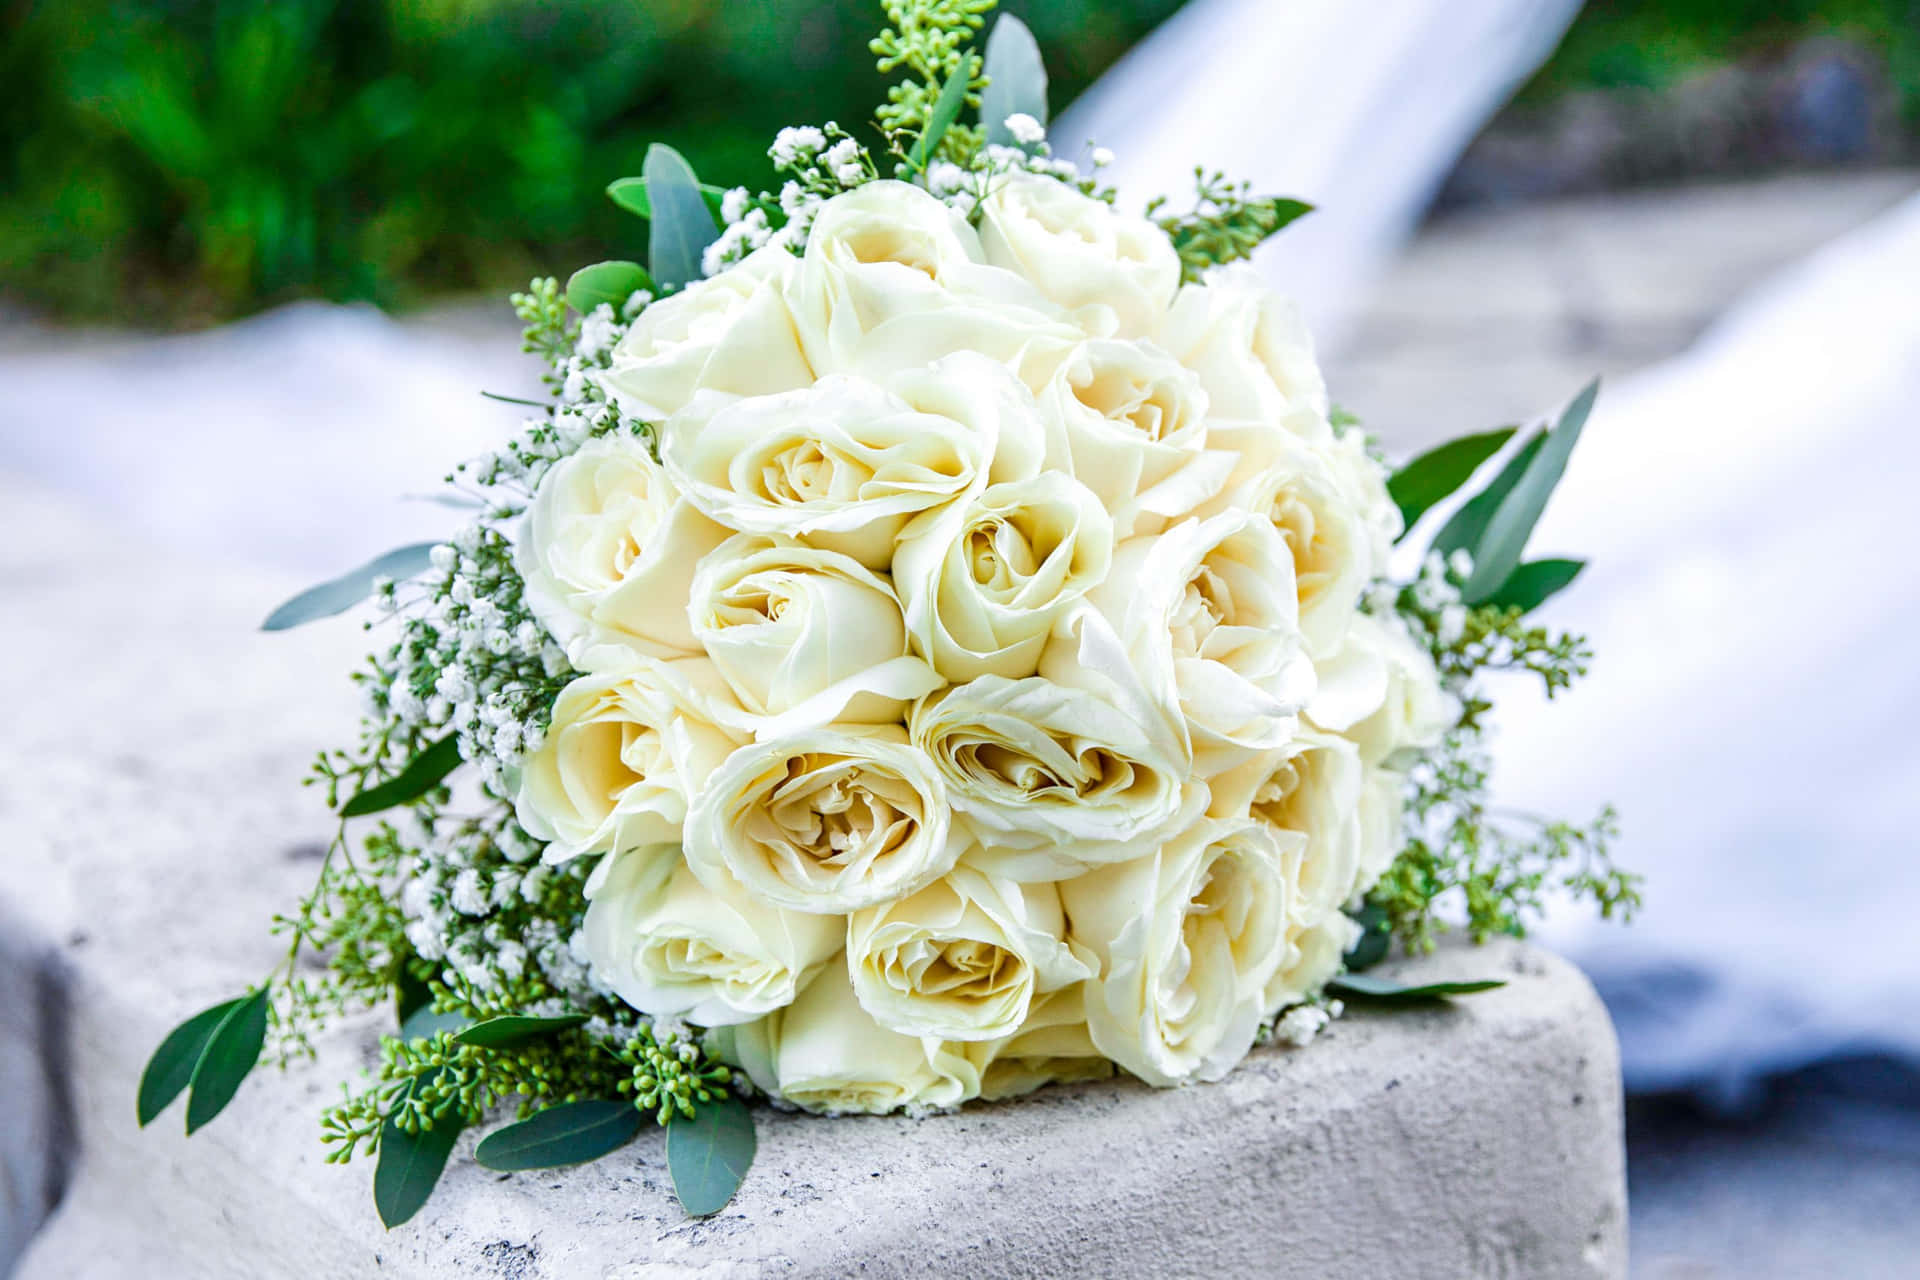 Elegant Bridal Bouquet with White Roses and Greenery Wallpaper